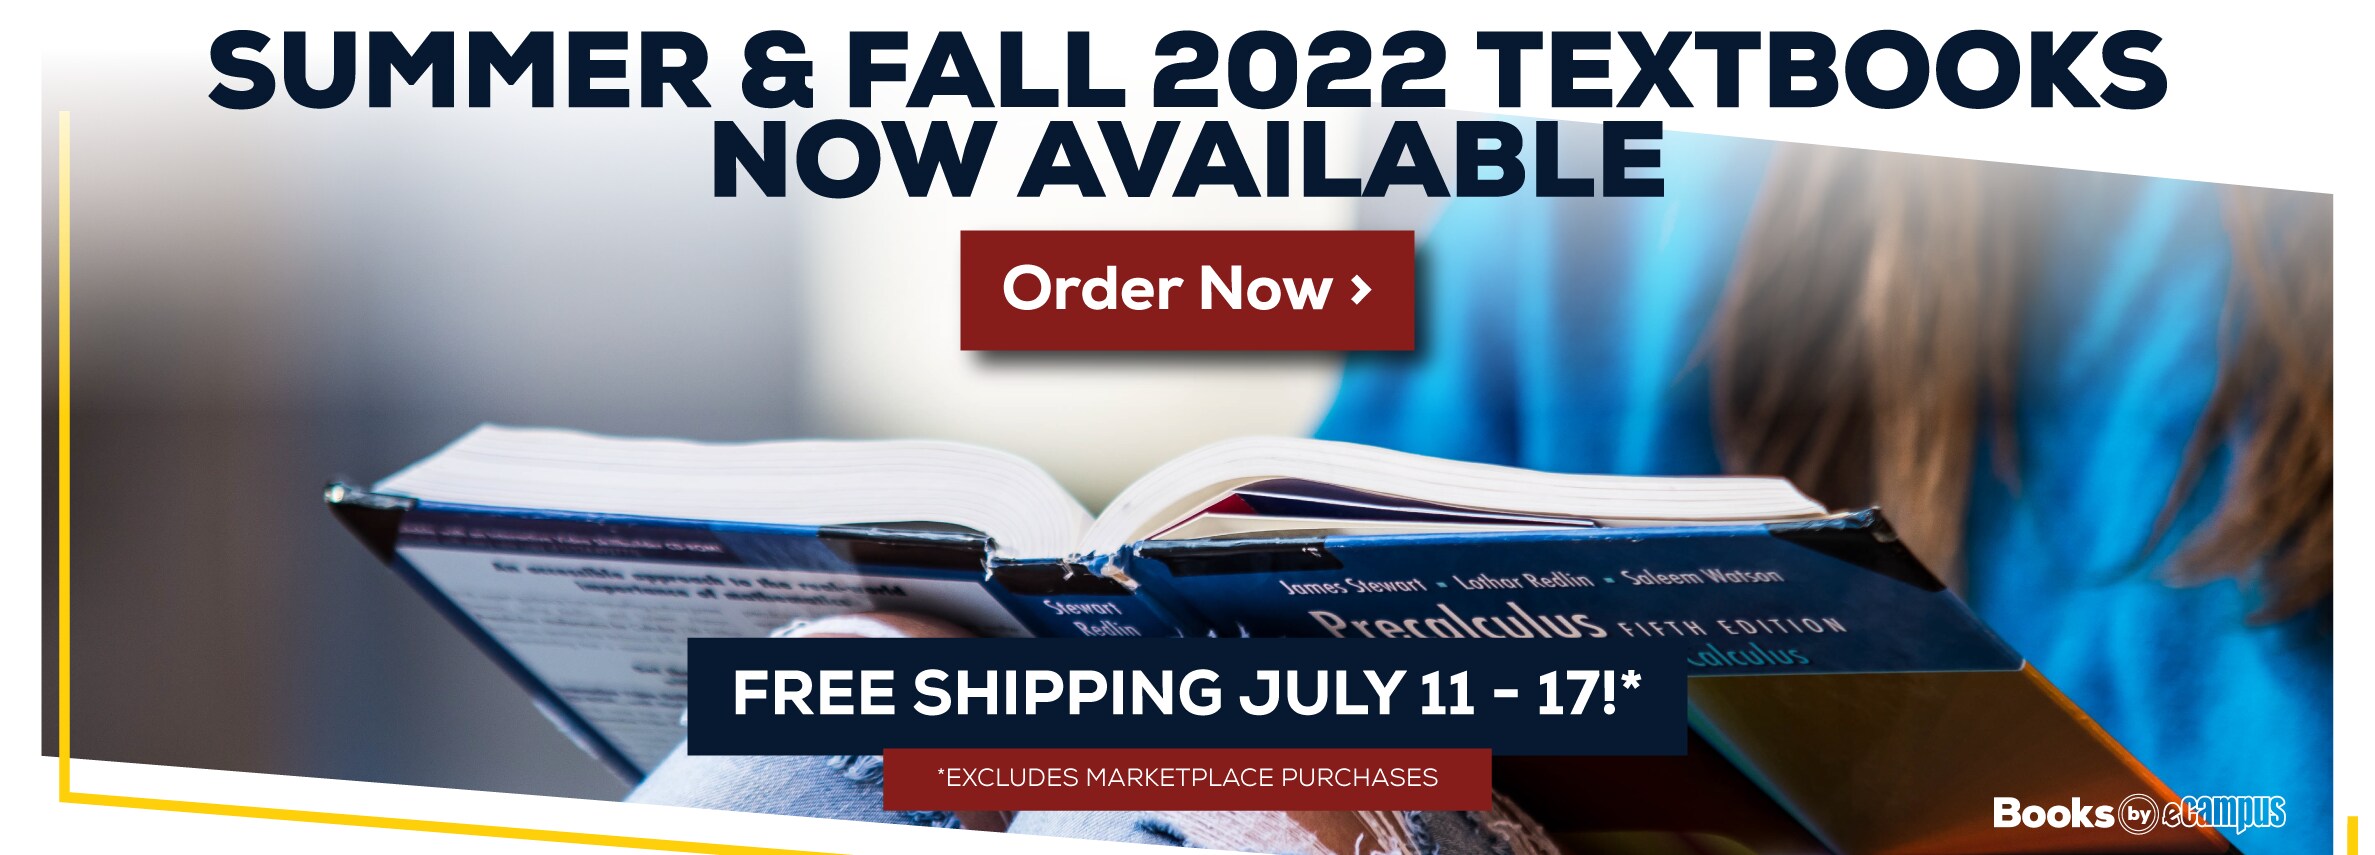 Summer & Fall 2022 Textbooks Now Available. Free shipping July 11 through July 17! Excludes marketplace purchases. Order Now.